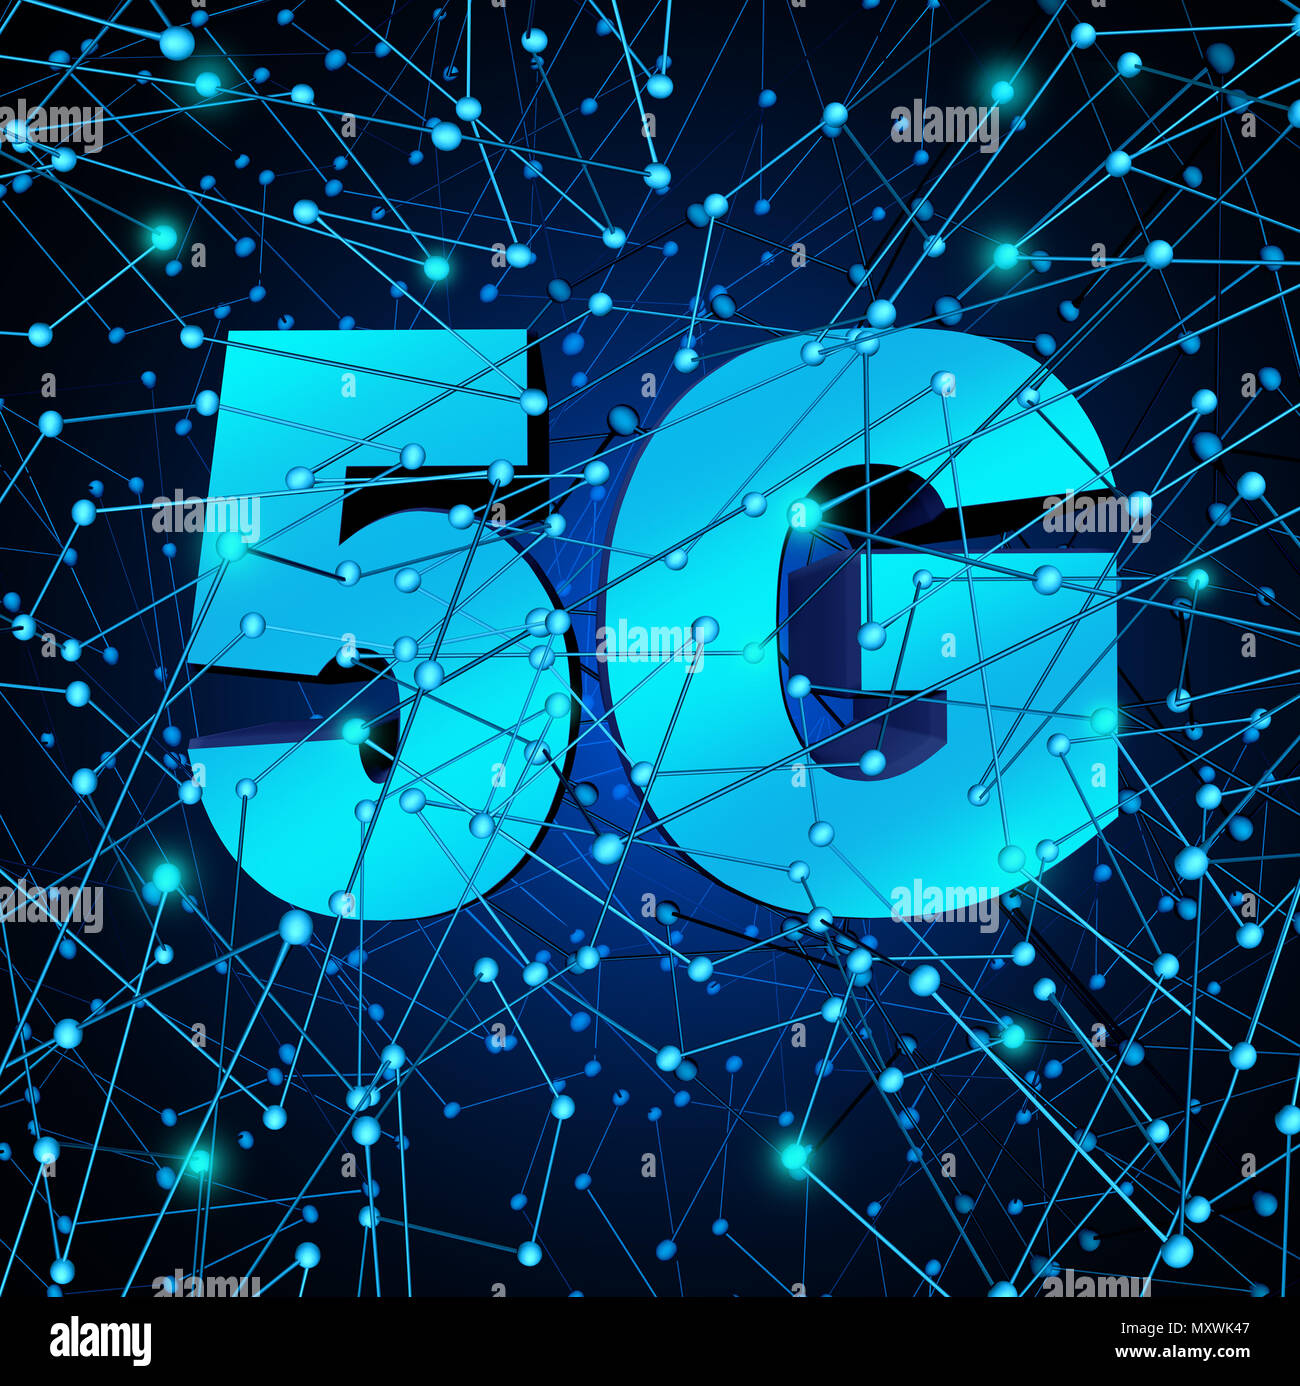 5G network wireless system as a fast telecommunication wifi cellular technology as a 3D illustration. Stock Photo